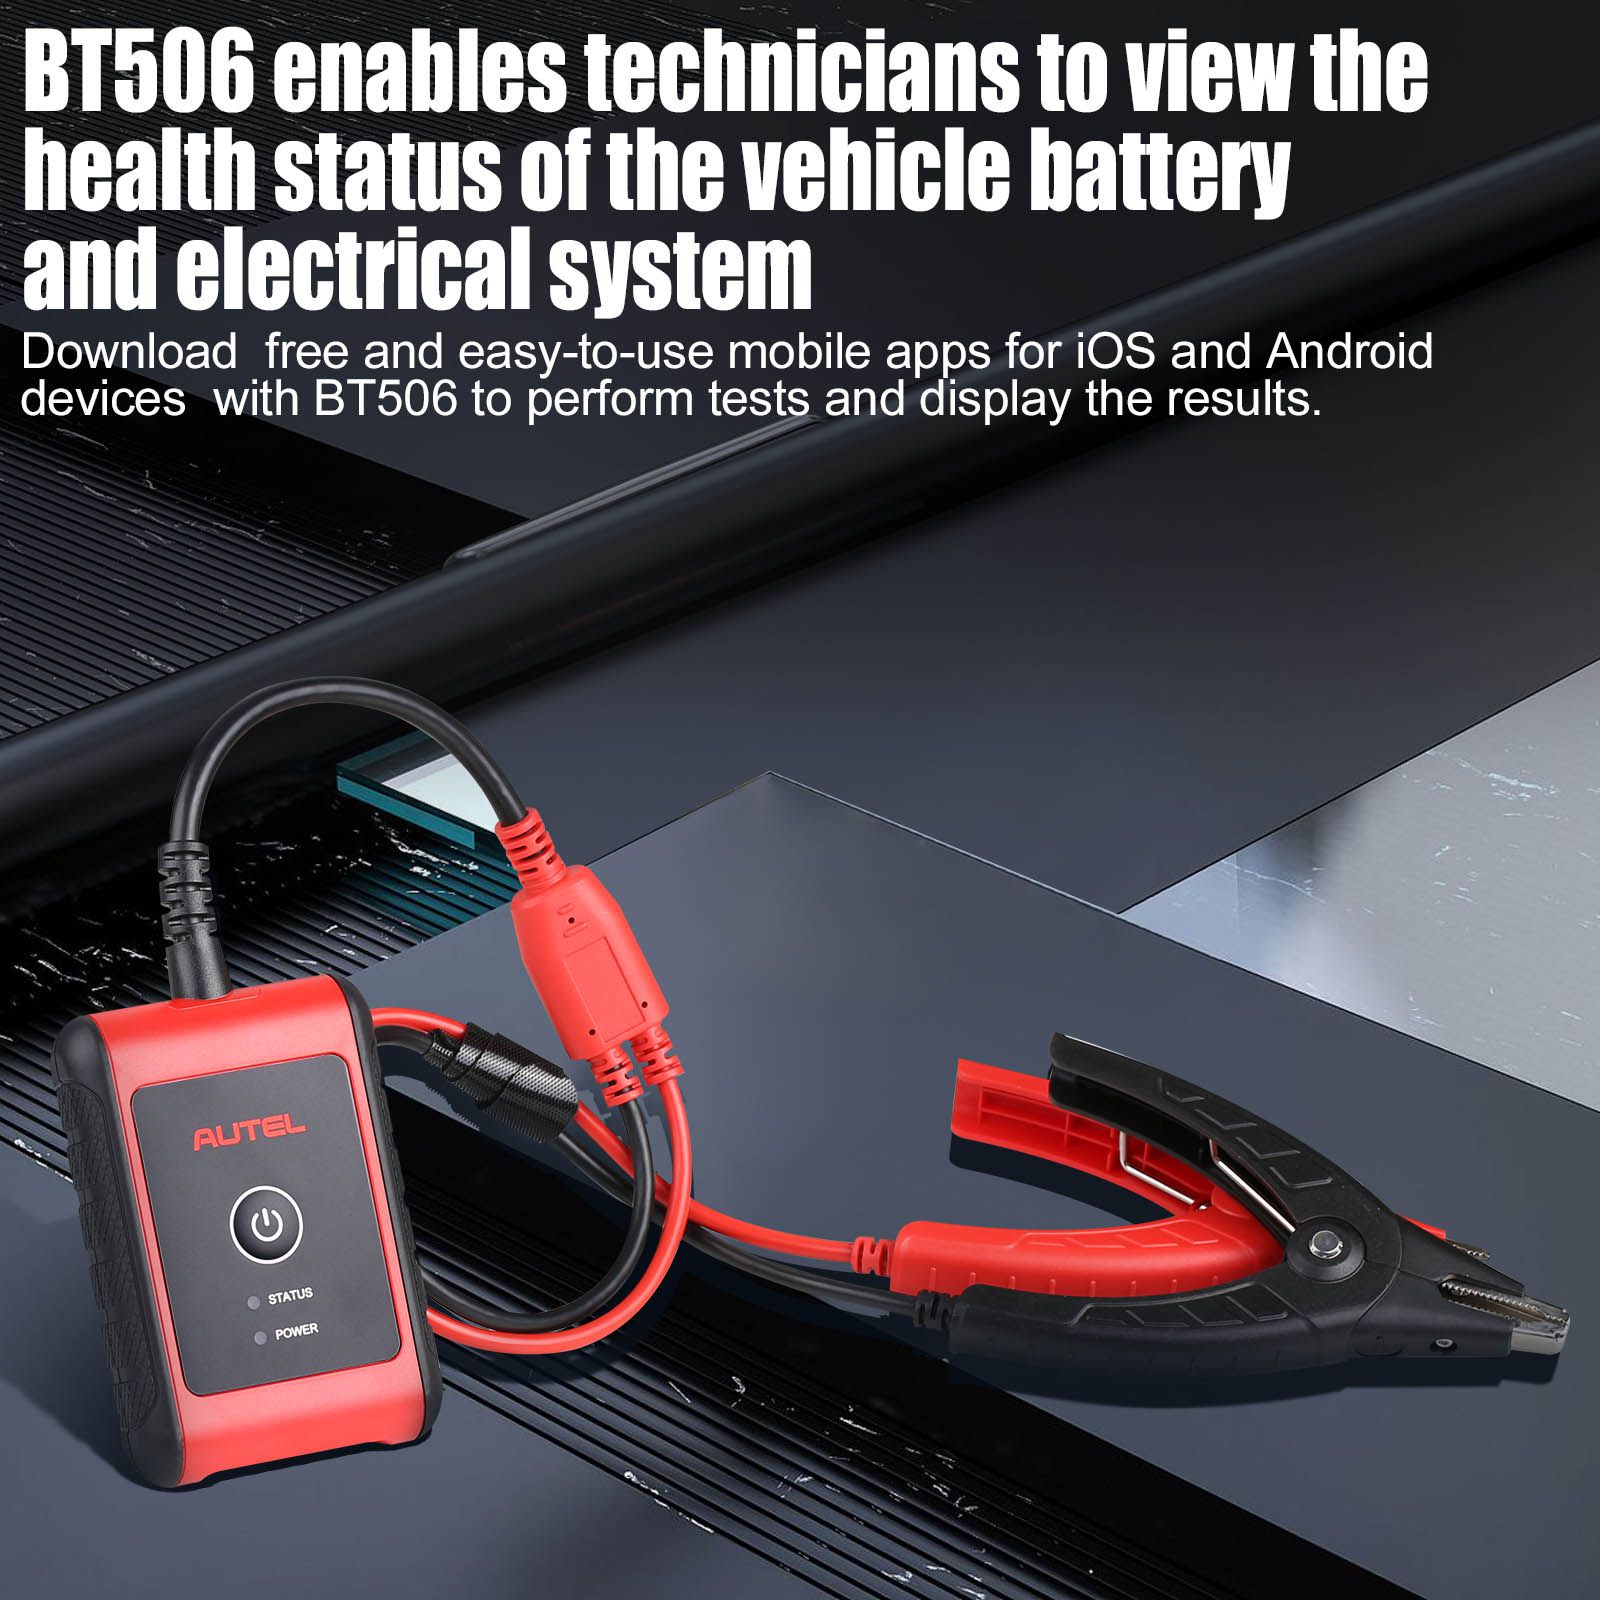 Autel MaxiBAS BT506 Auto Battery and Electrical System Analysis Tool work with MK808BT/ MK808BT PRO/ MX808TS/ MK808TS